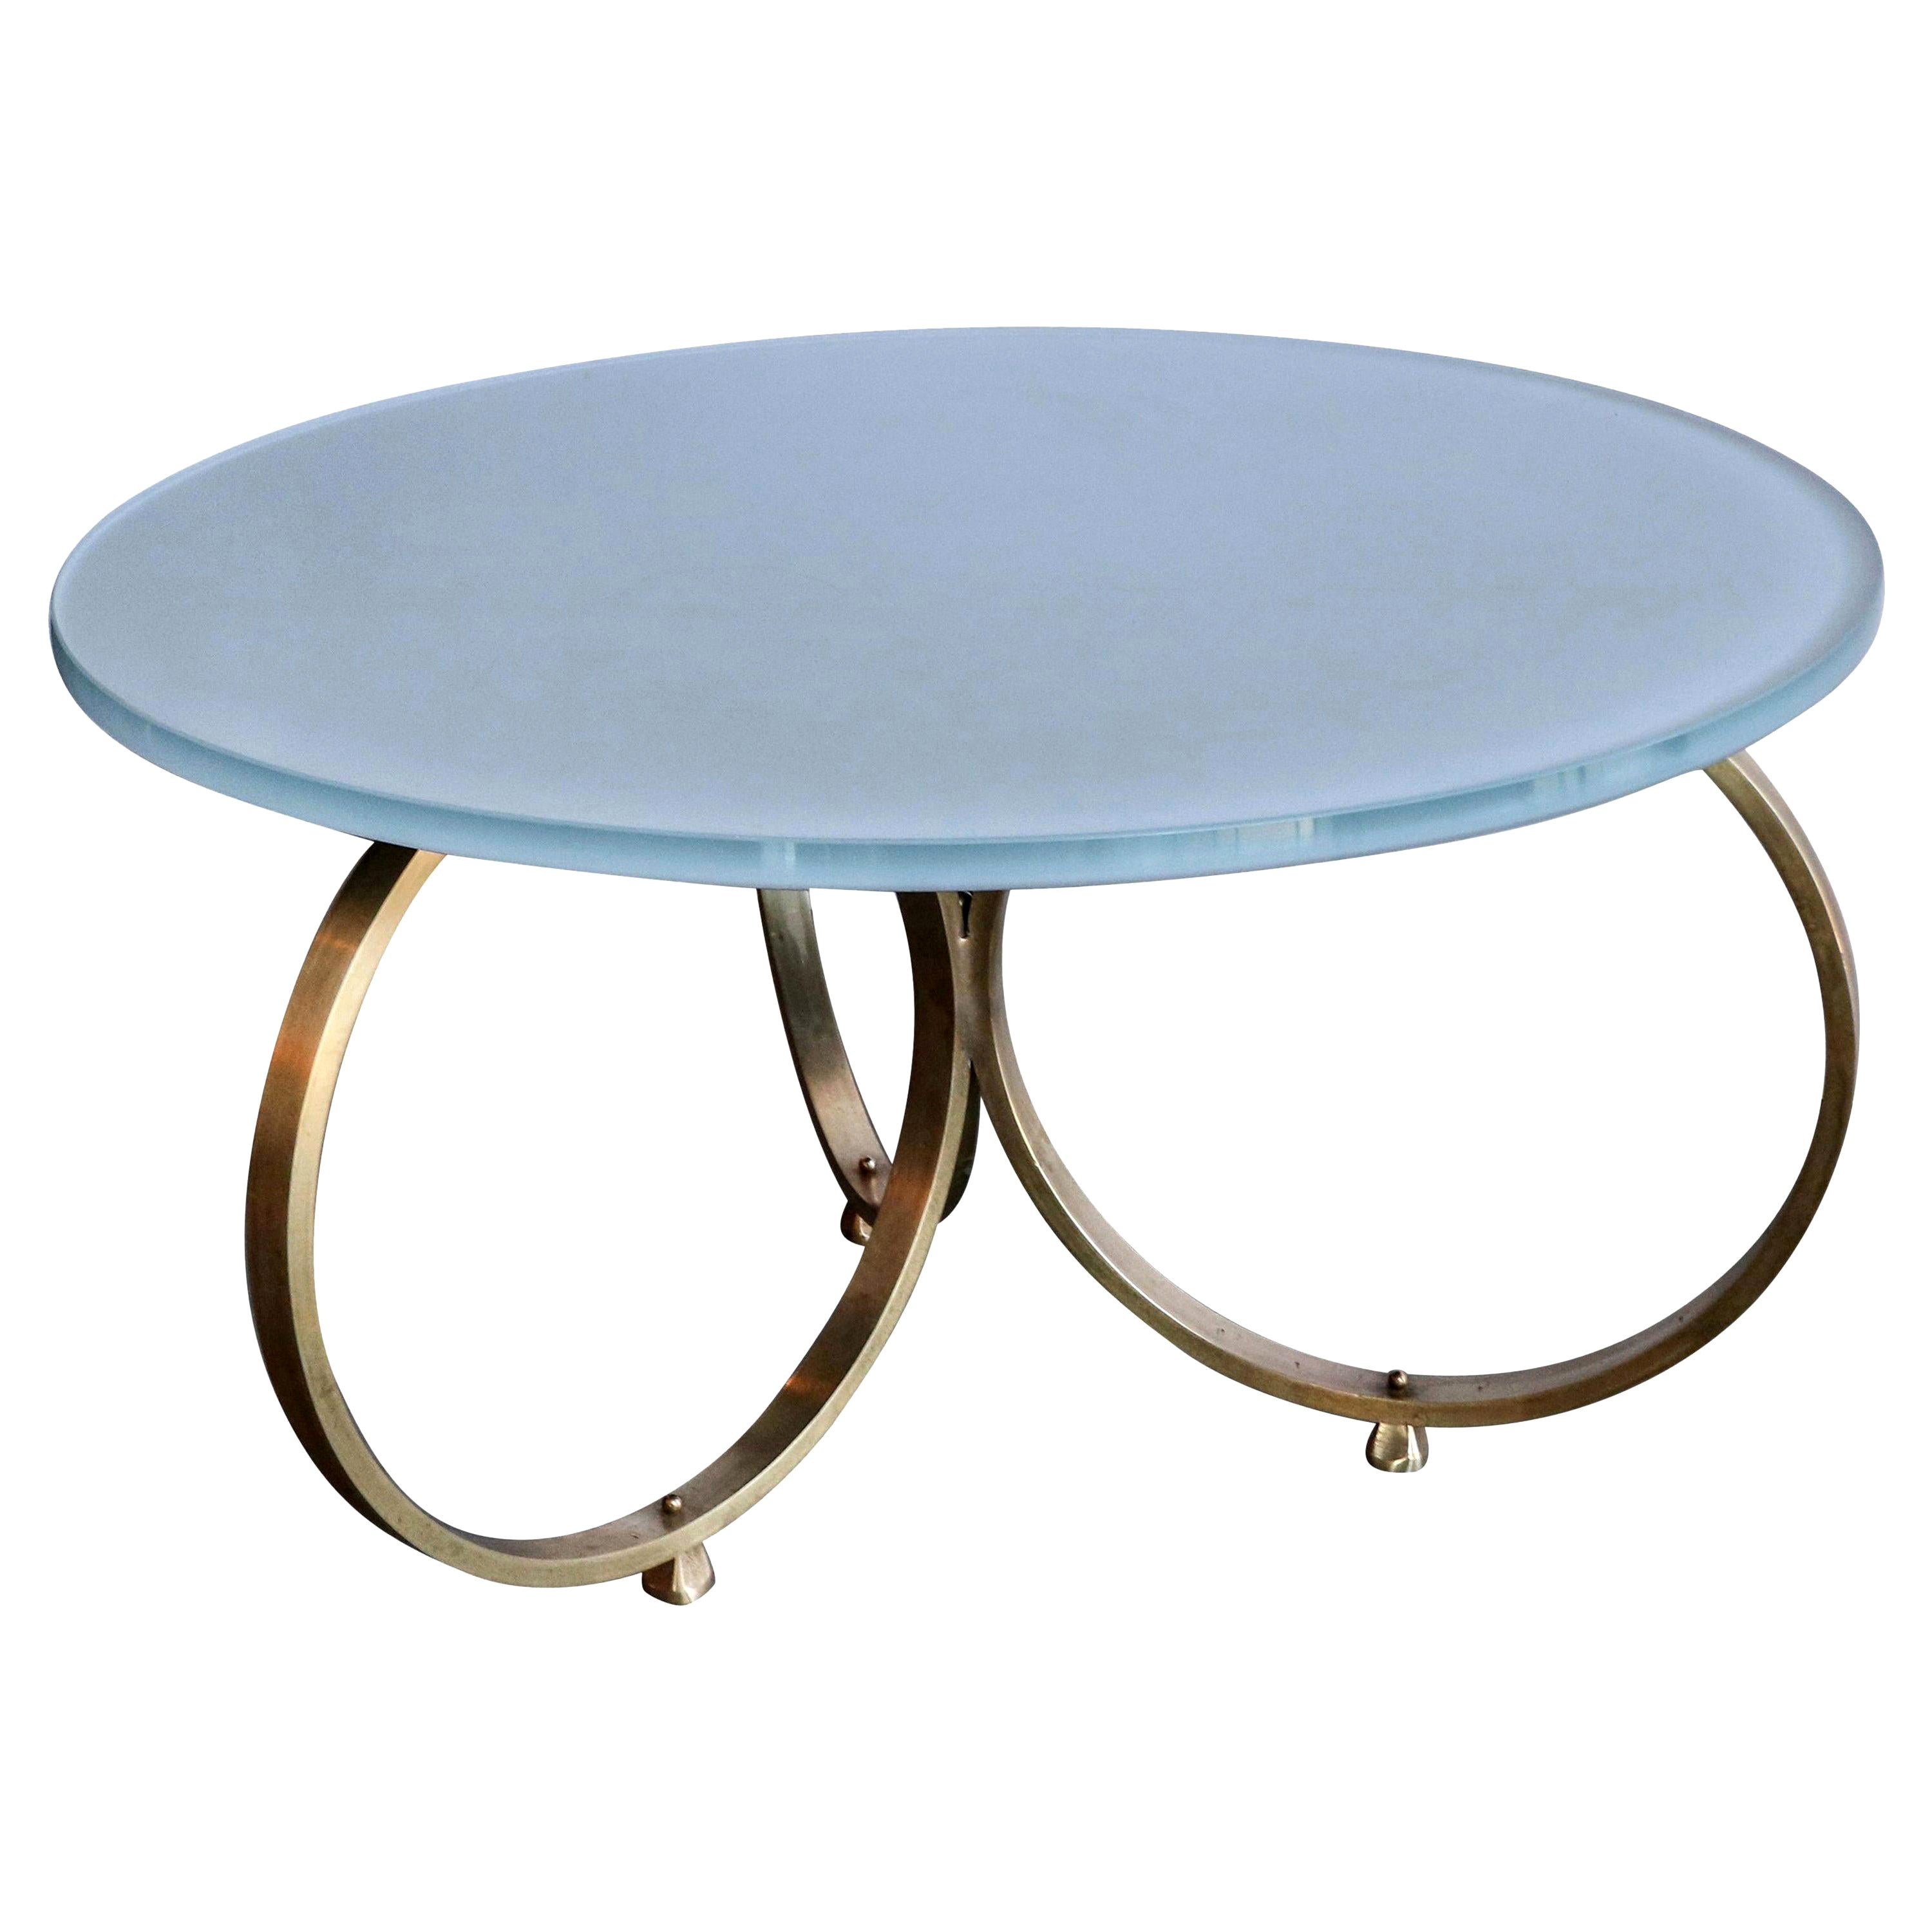 Custom Brass Coffee Table with Blue Reverse Painted Glass Top by Adesso Imports